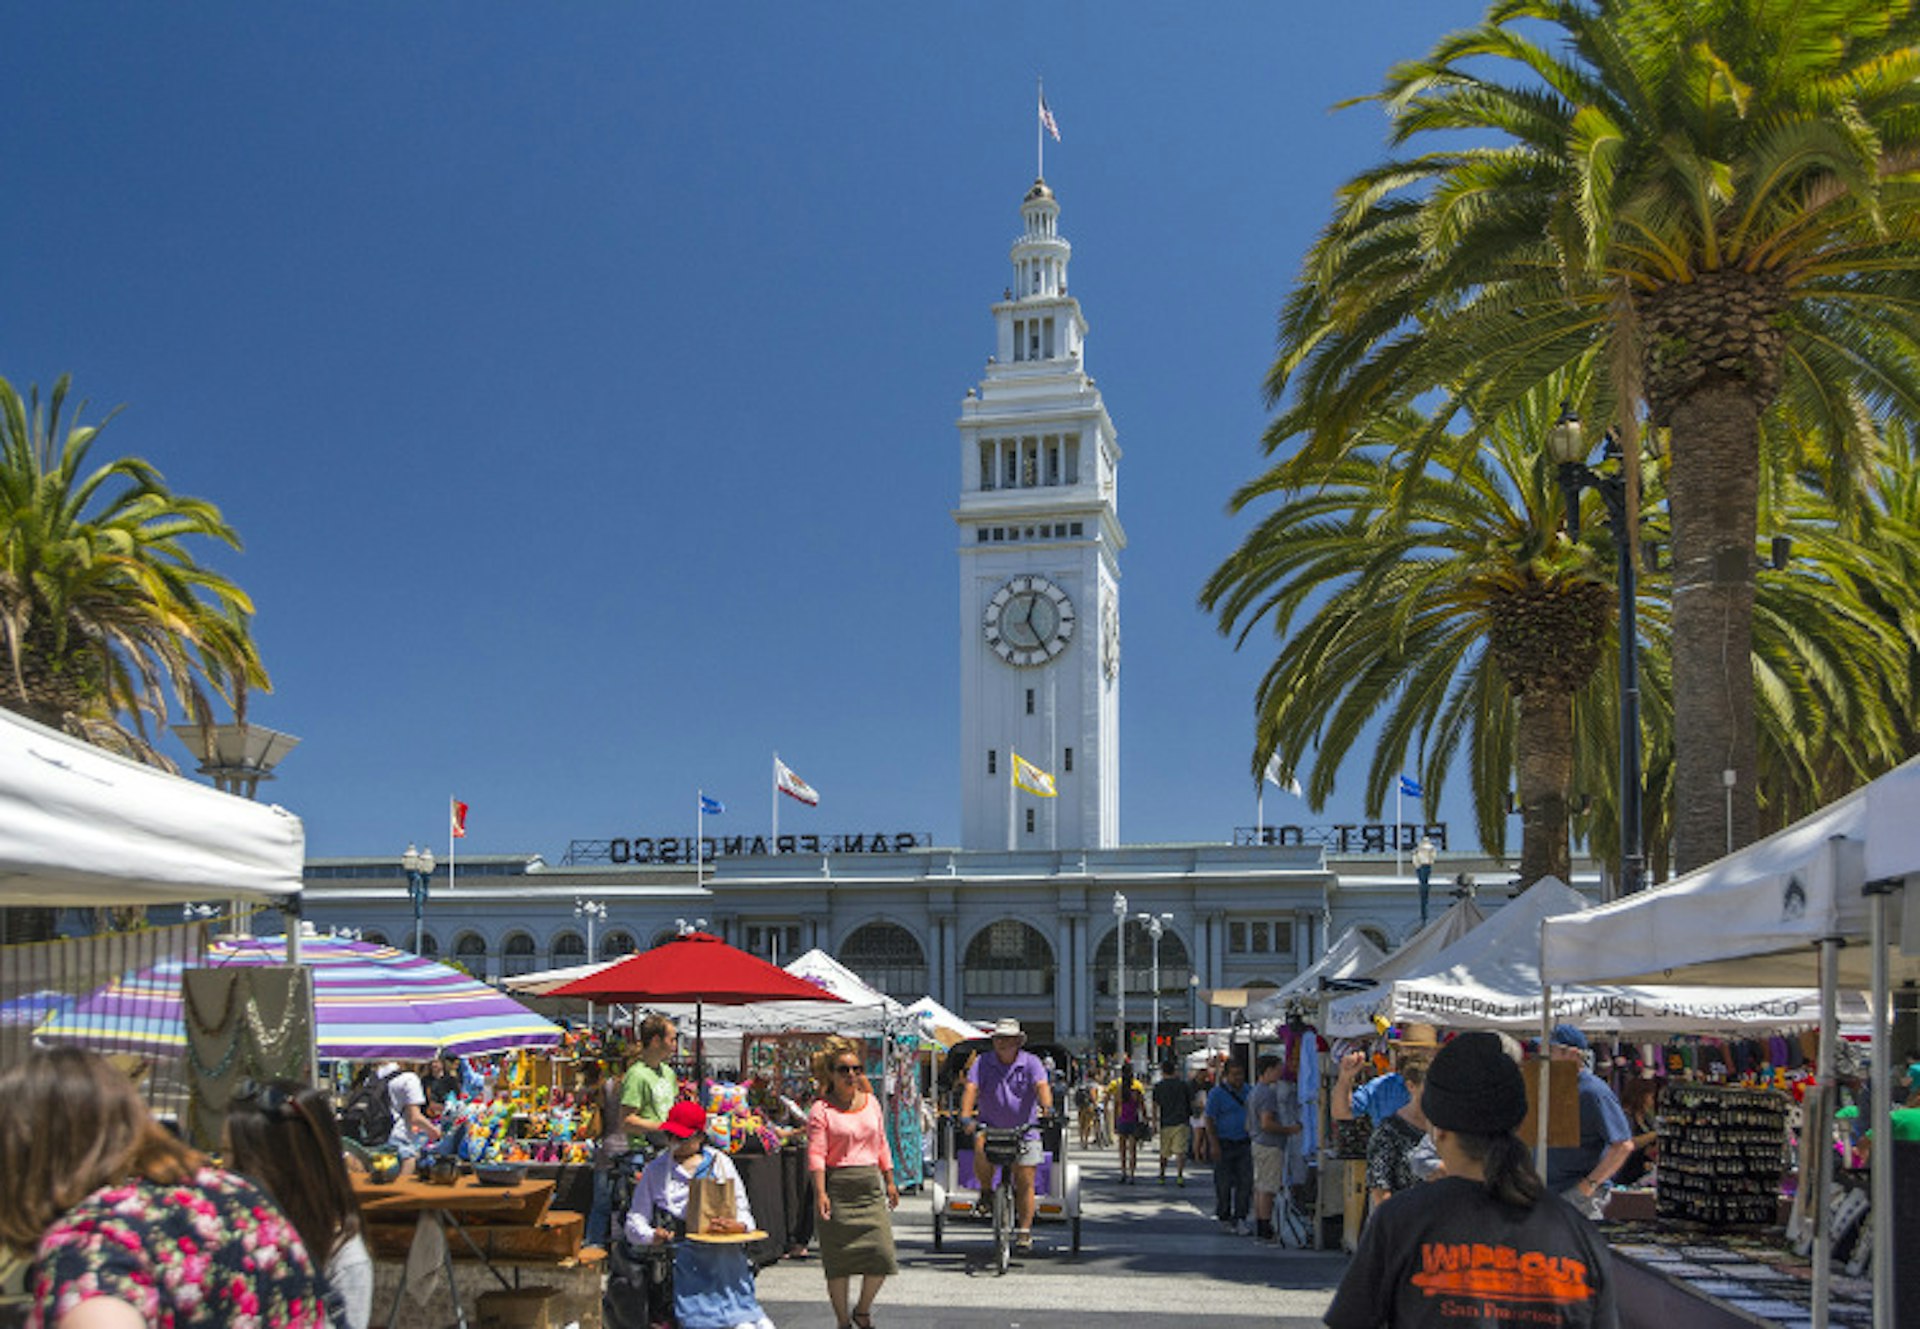 Treat yourself at the Ferry Building farmers market. Image by Izzet Keribar / Lonely Planet Images / Getty